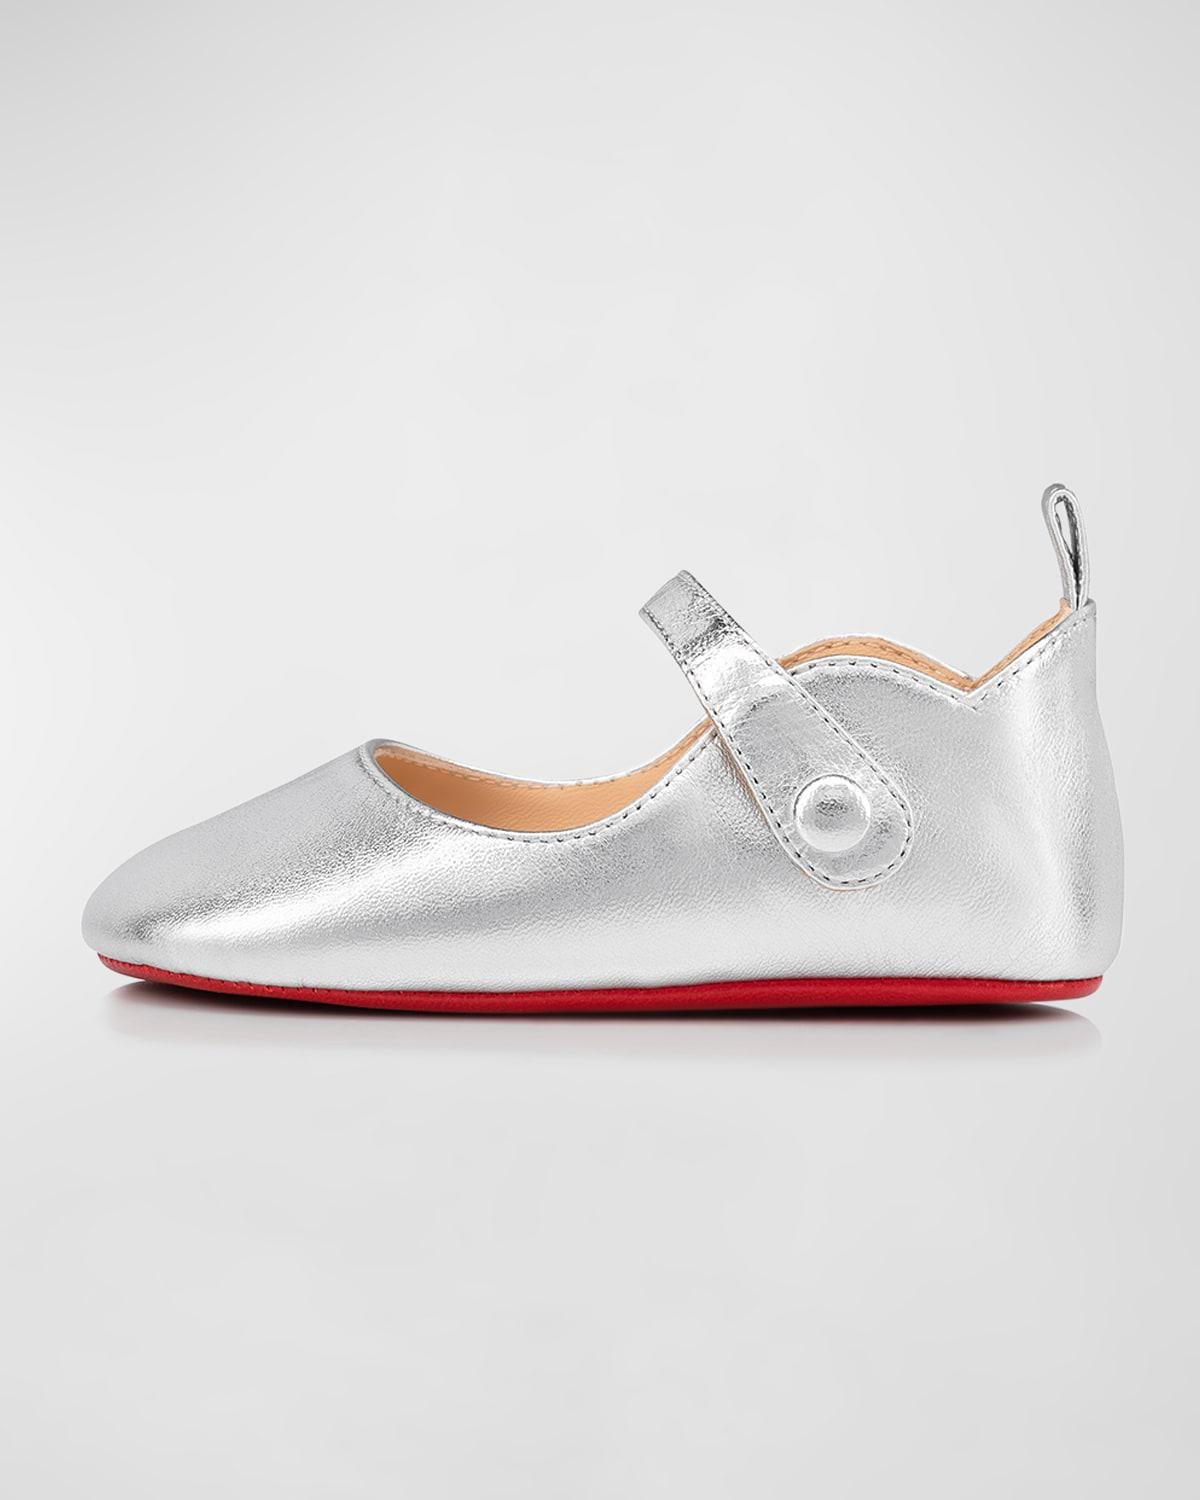 Girl's Love Chick Metallic Leather Ballerina Shoes, Baby by CHRISTIAN LOUBOUTIN